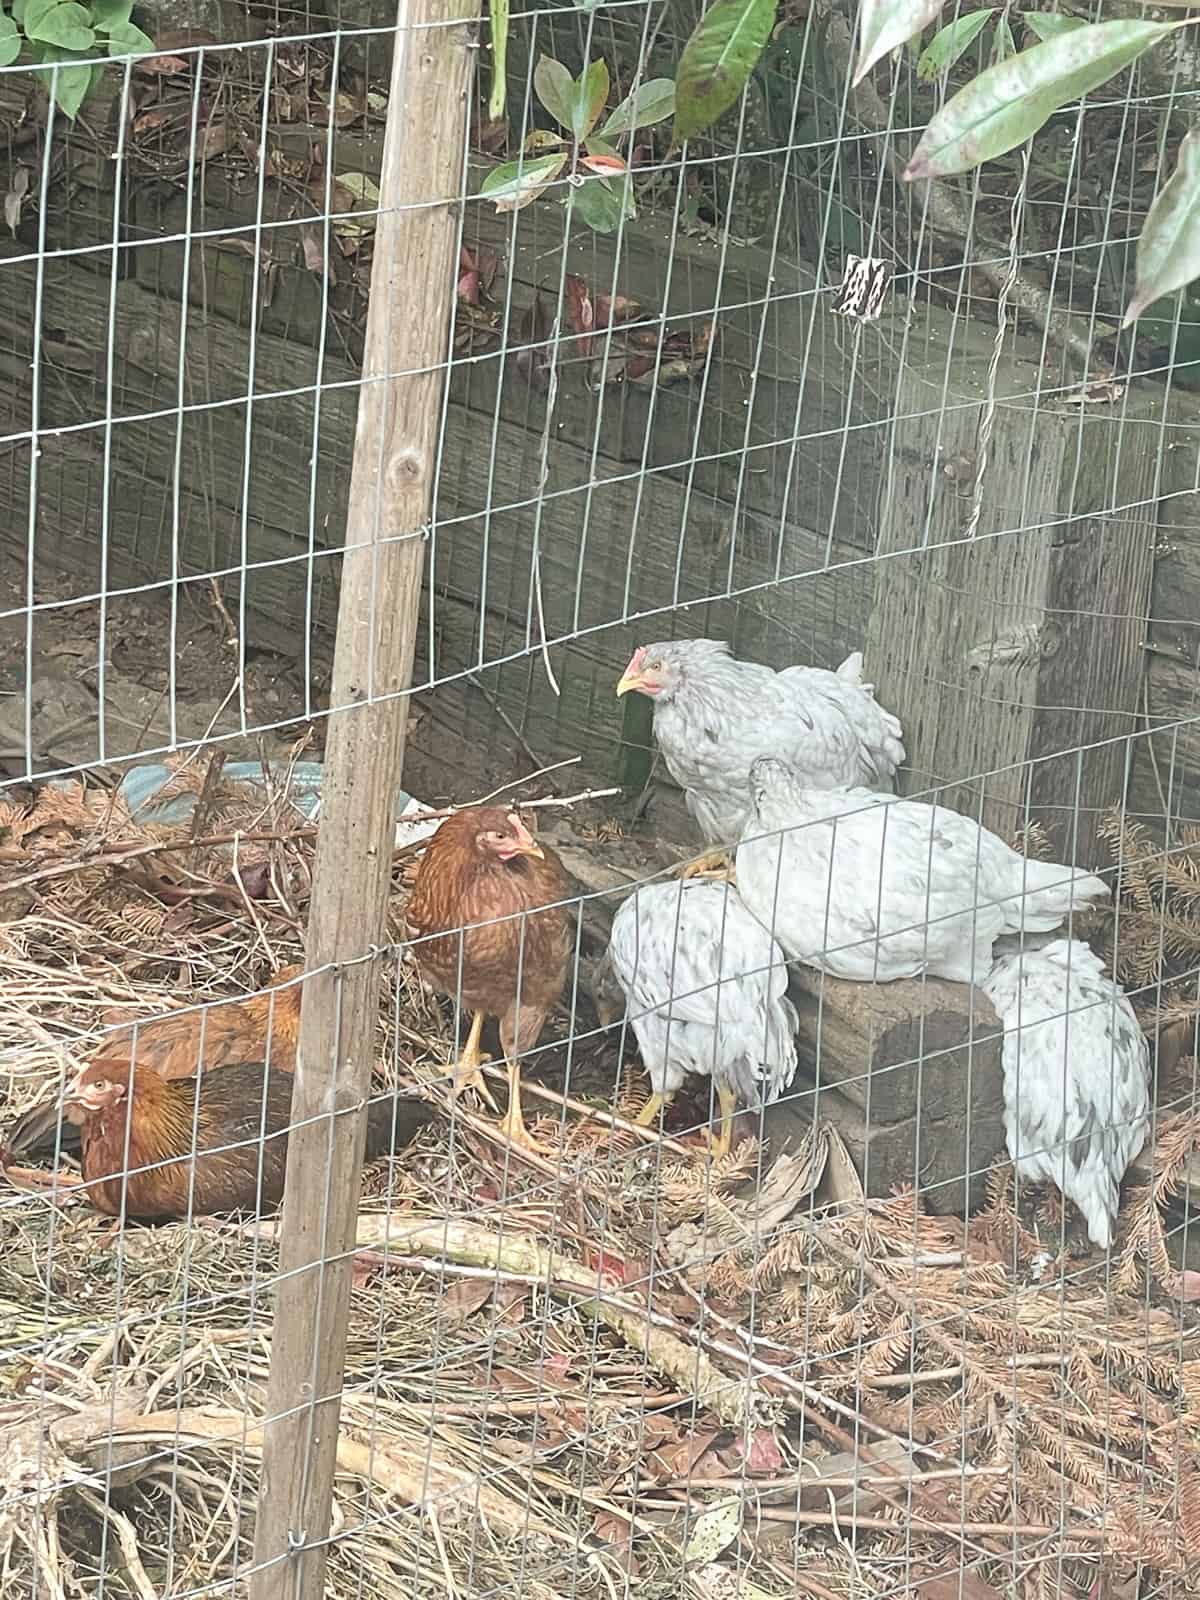 young chickens behind a fence.